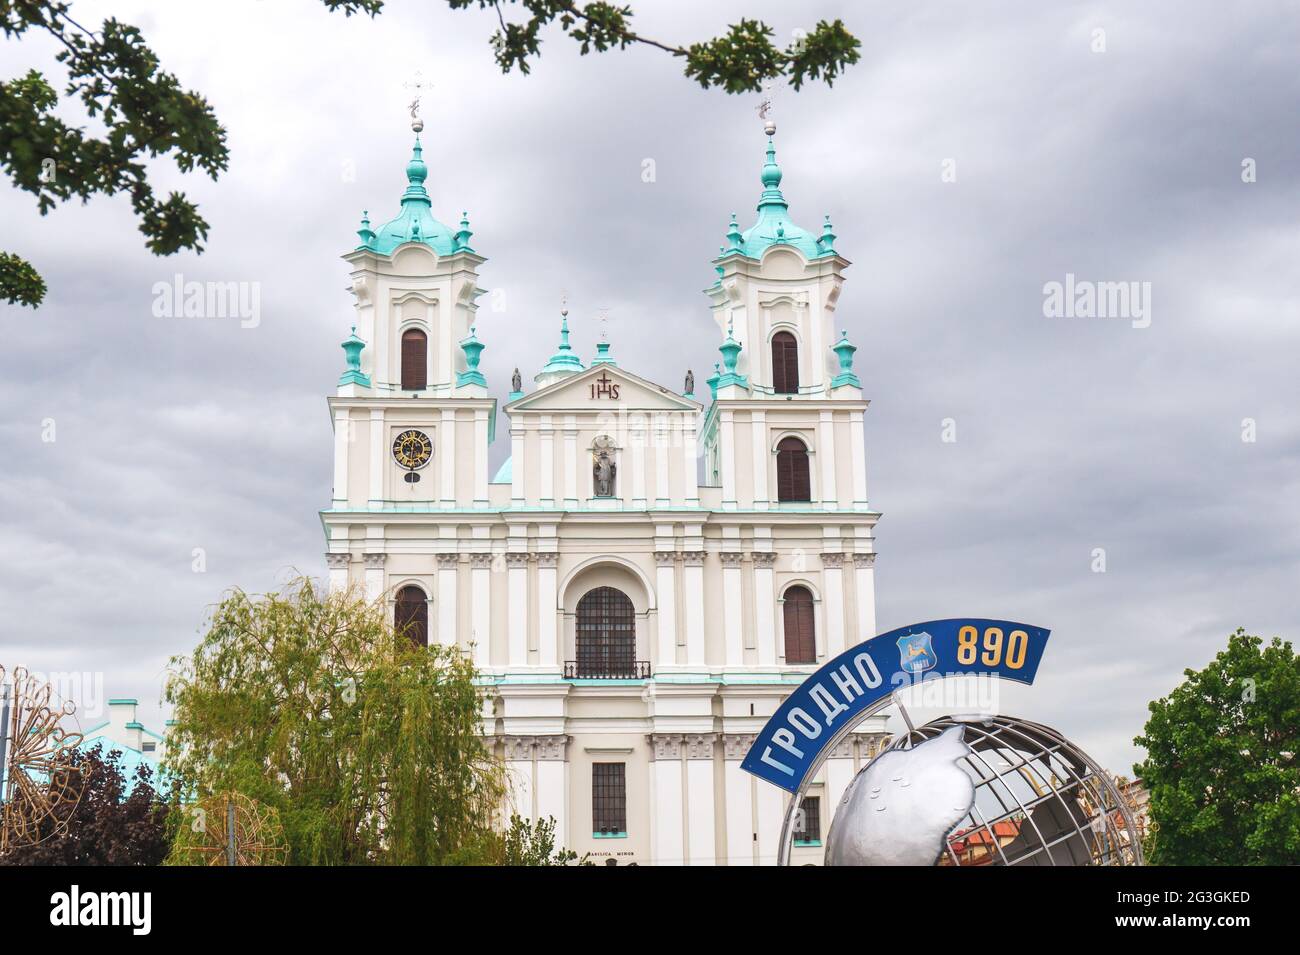 GRODNO, BELARUS - MAY 22, 2021: Cathedral of Saint Francis Xavier in Grodno, Belarus. Farny Catholic church facade and sign Grodno 890 Stock Photo